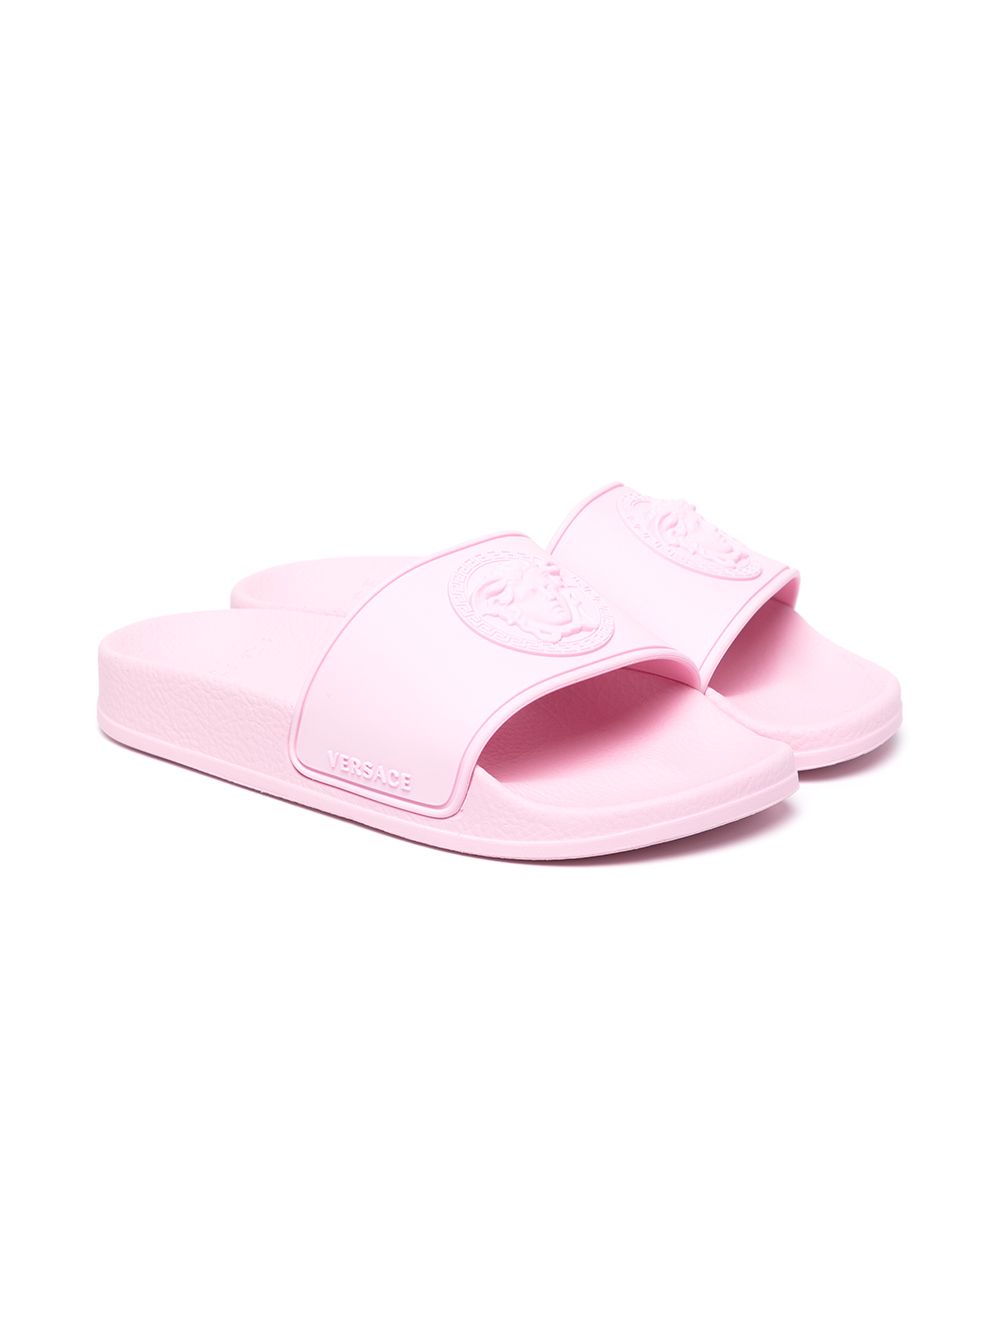 Shop Versace Kids Medusa-head sliders with Express Delivery - FARFETCH